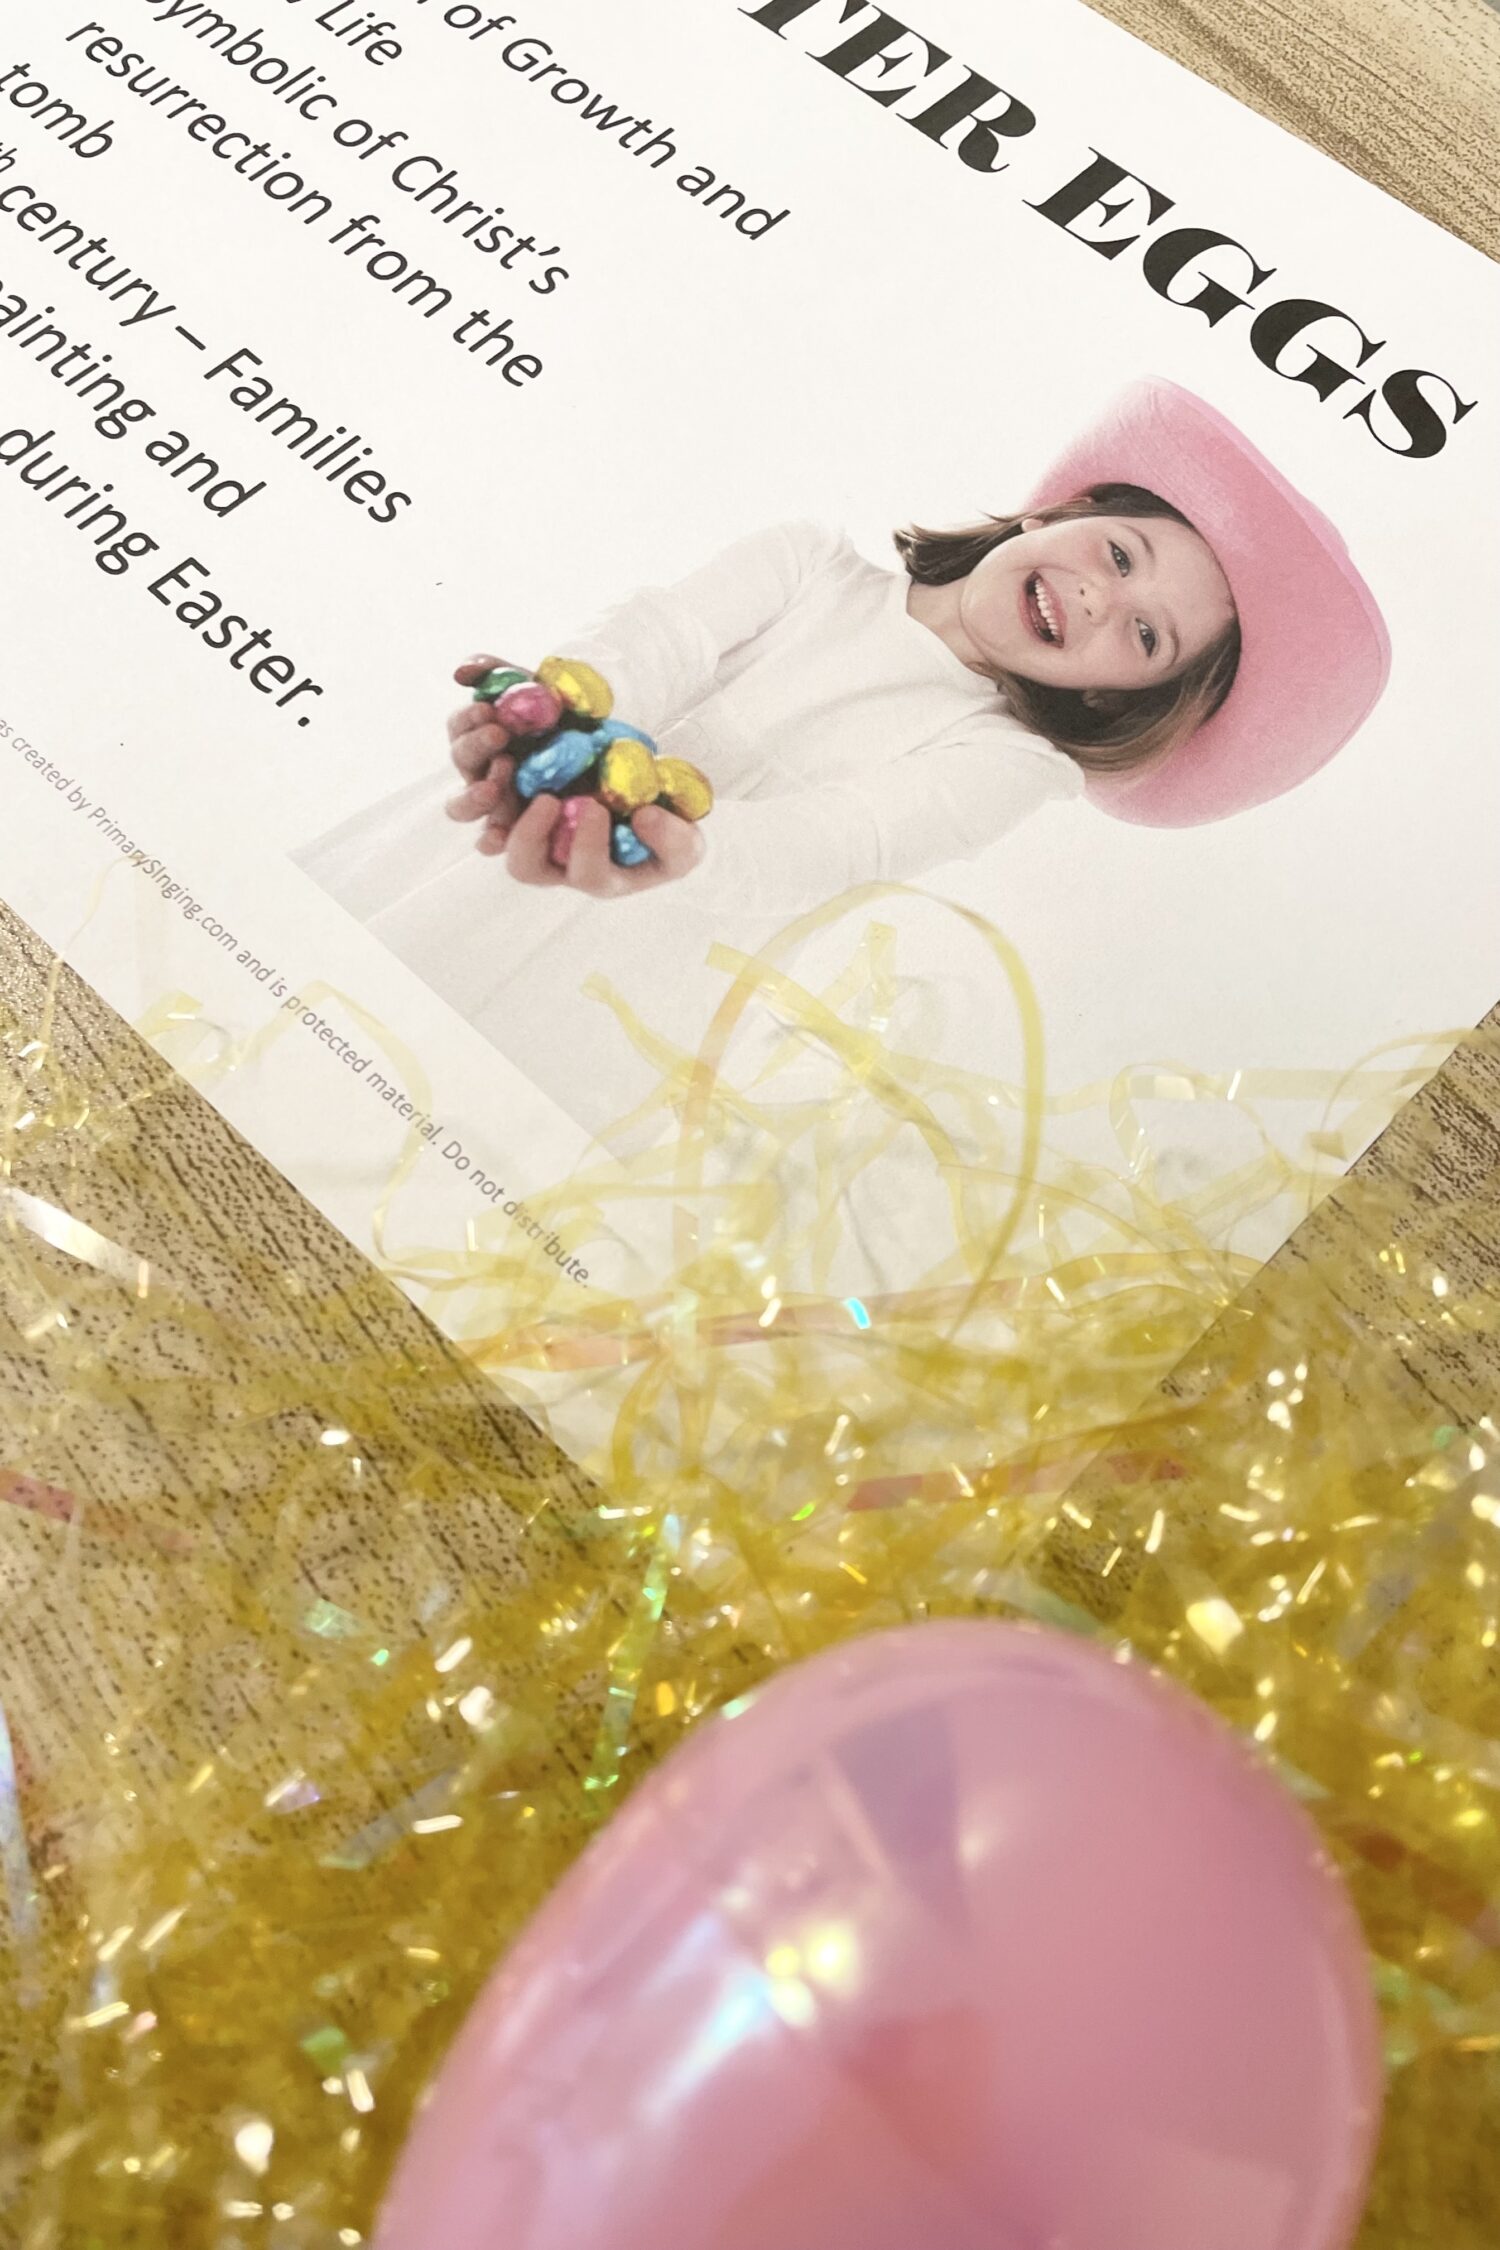 Use this fun Easter Symbols Singing Time Activity to learn more about different Easter traditions like the Easter Bunny, Easter eggs, lily flowers, and lambs with this Easter singing time idea for LDS Primary Music Leaders.